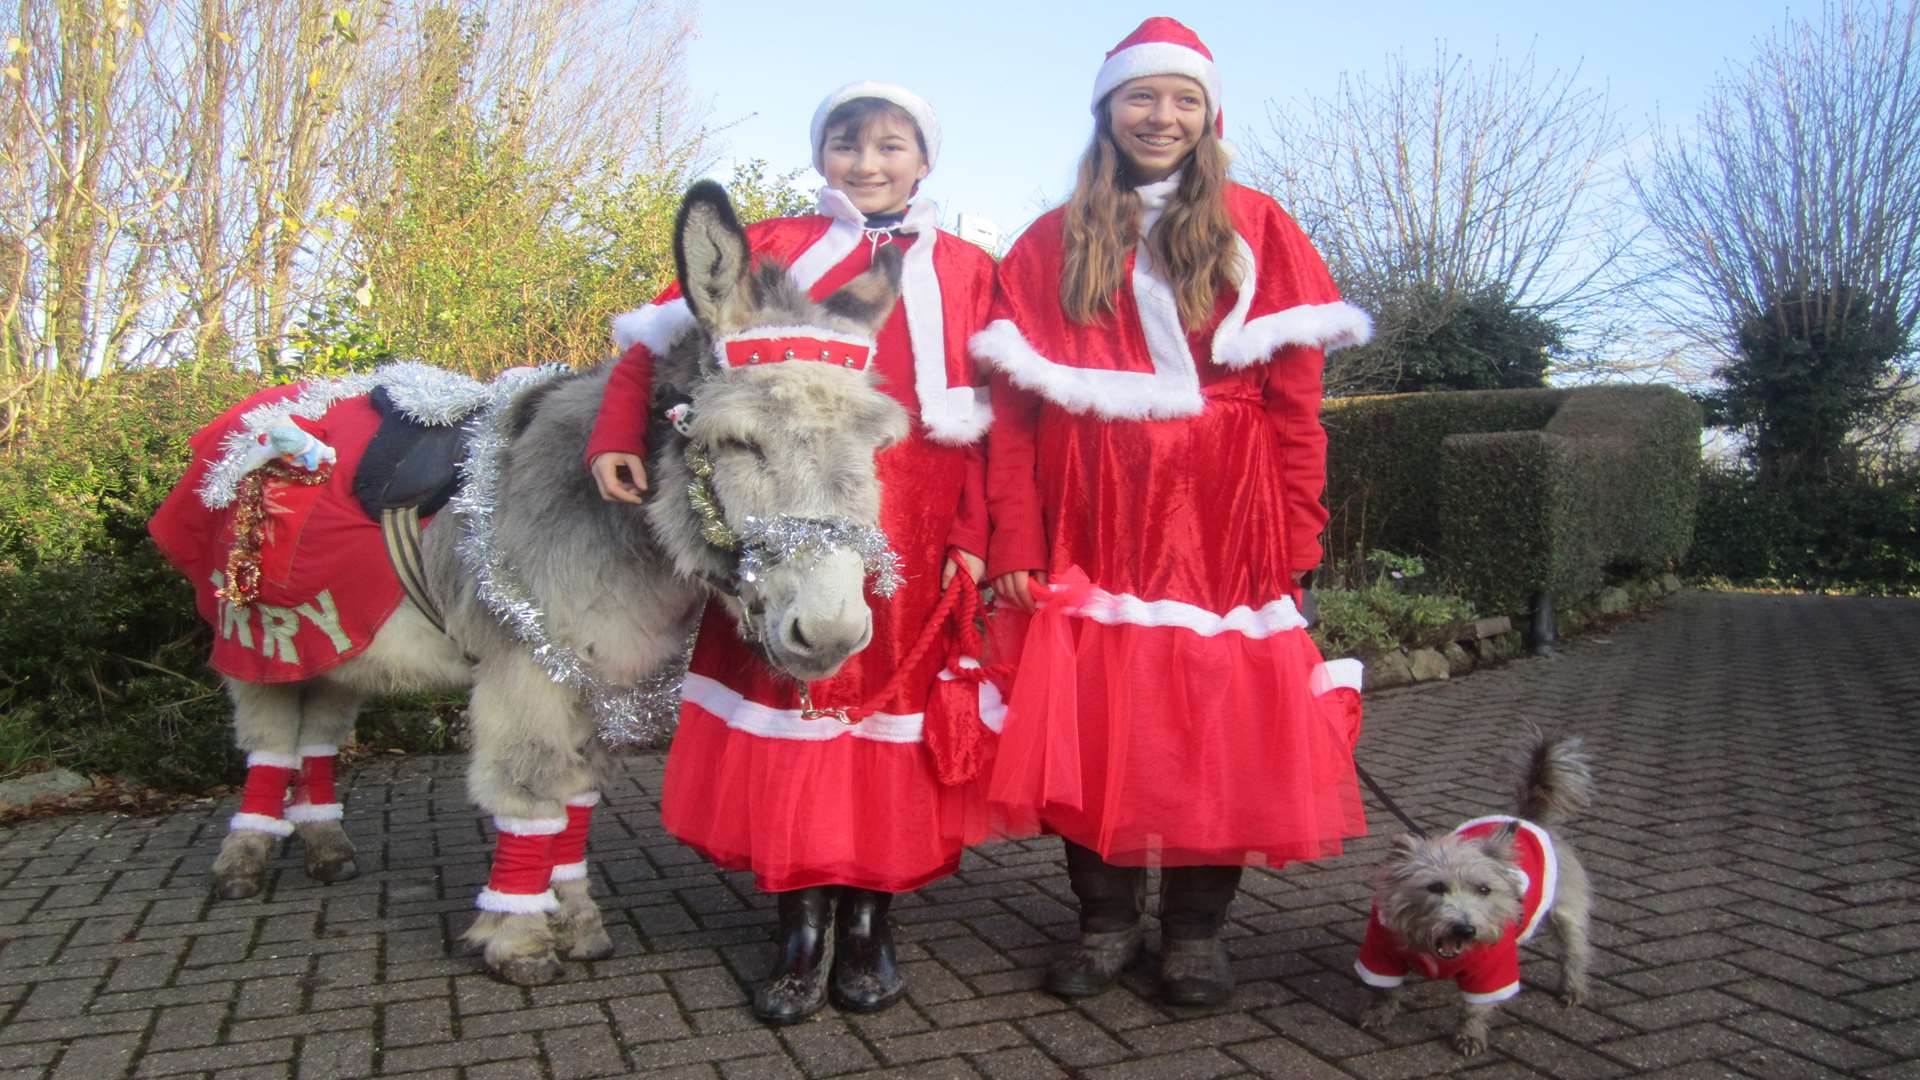 Harry the donkey pictured with cousins Jessica and Isla Greenaway, and pet dog Morag